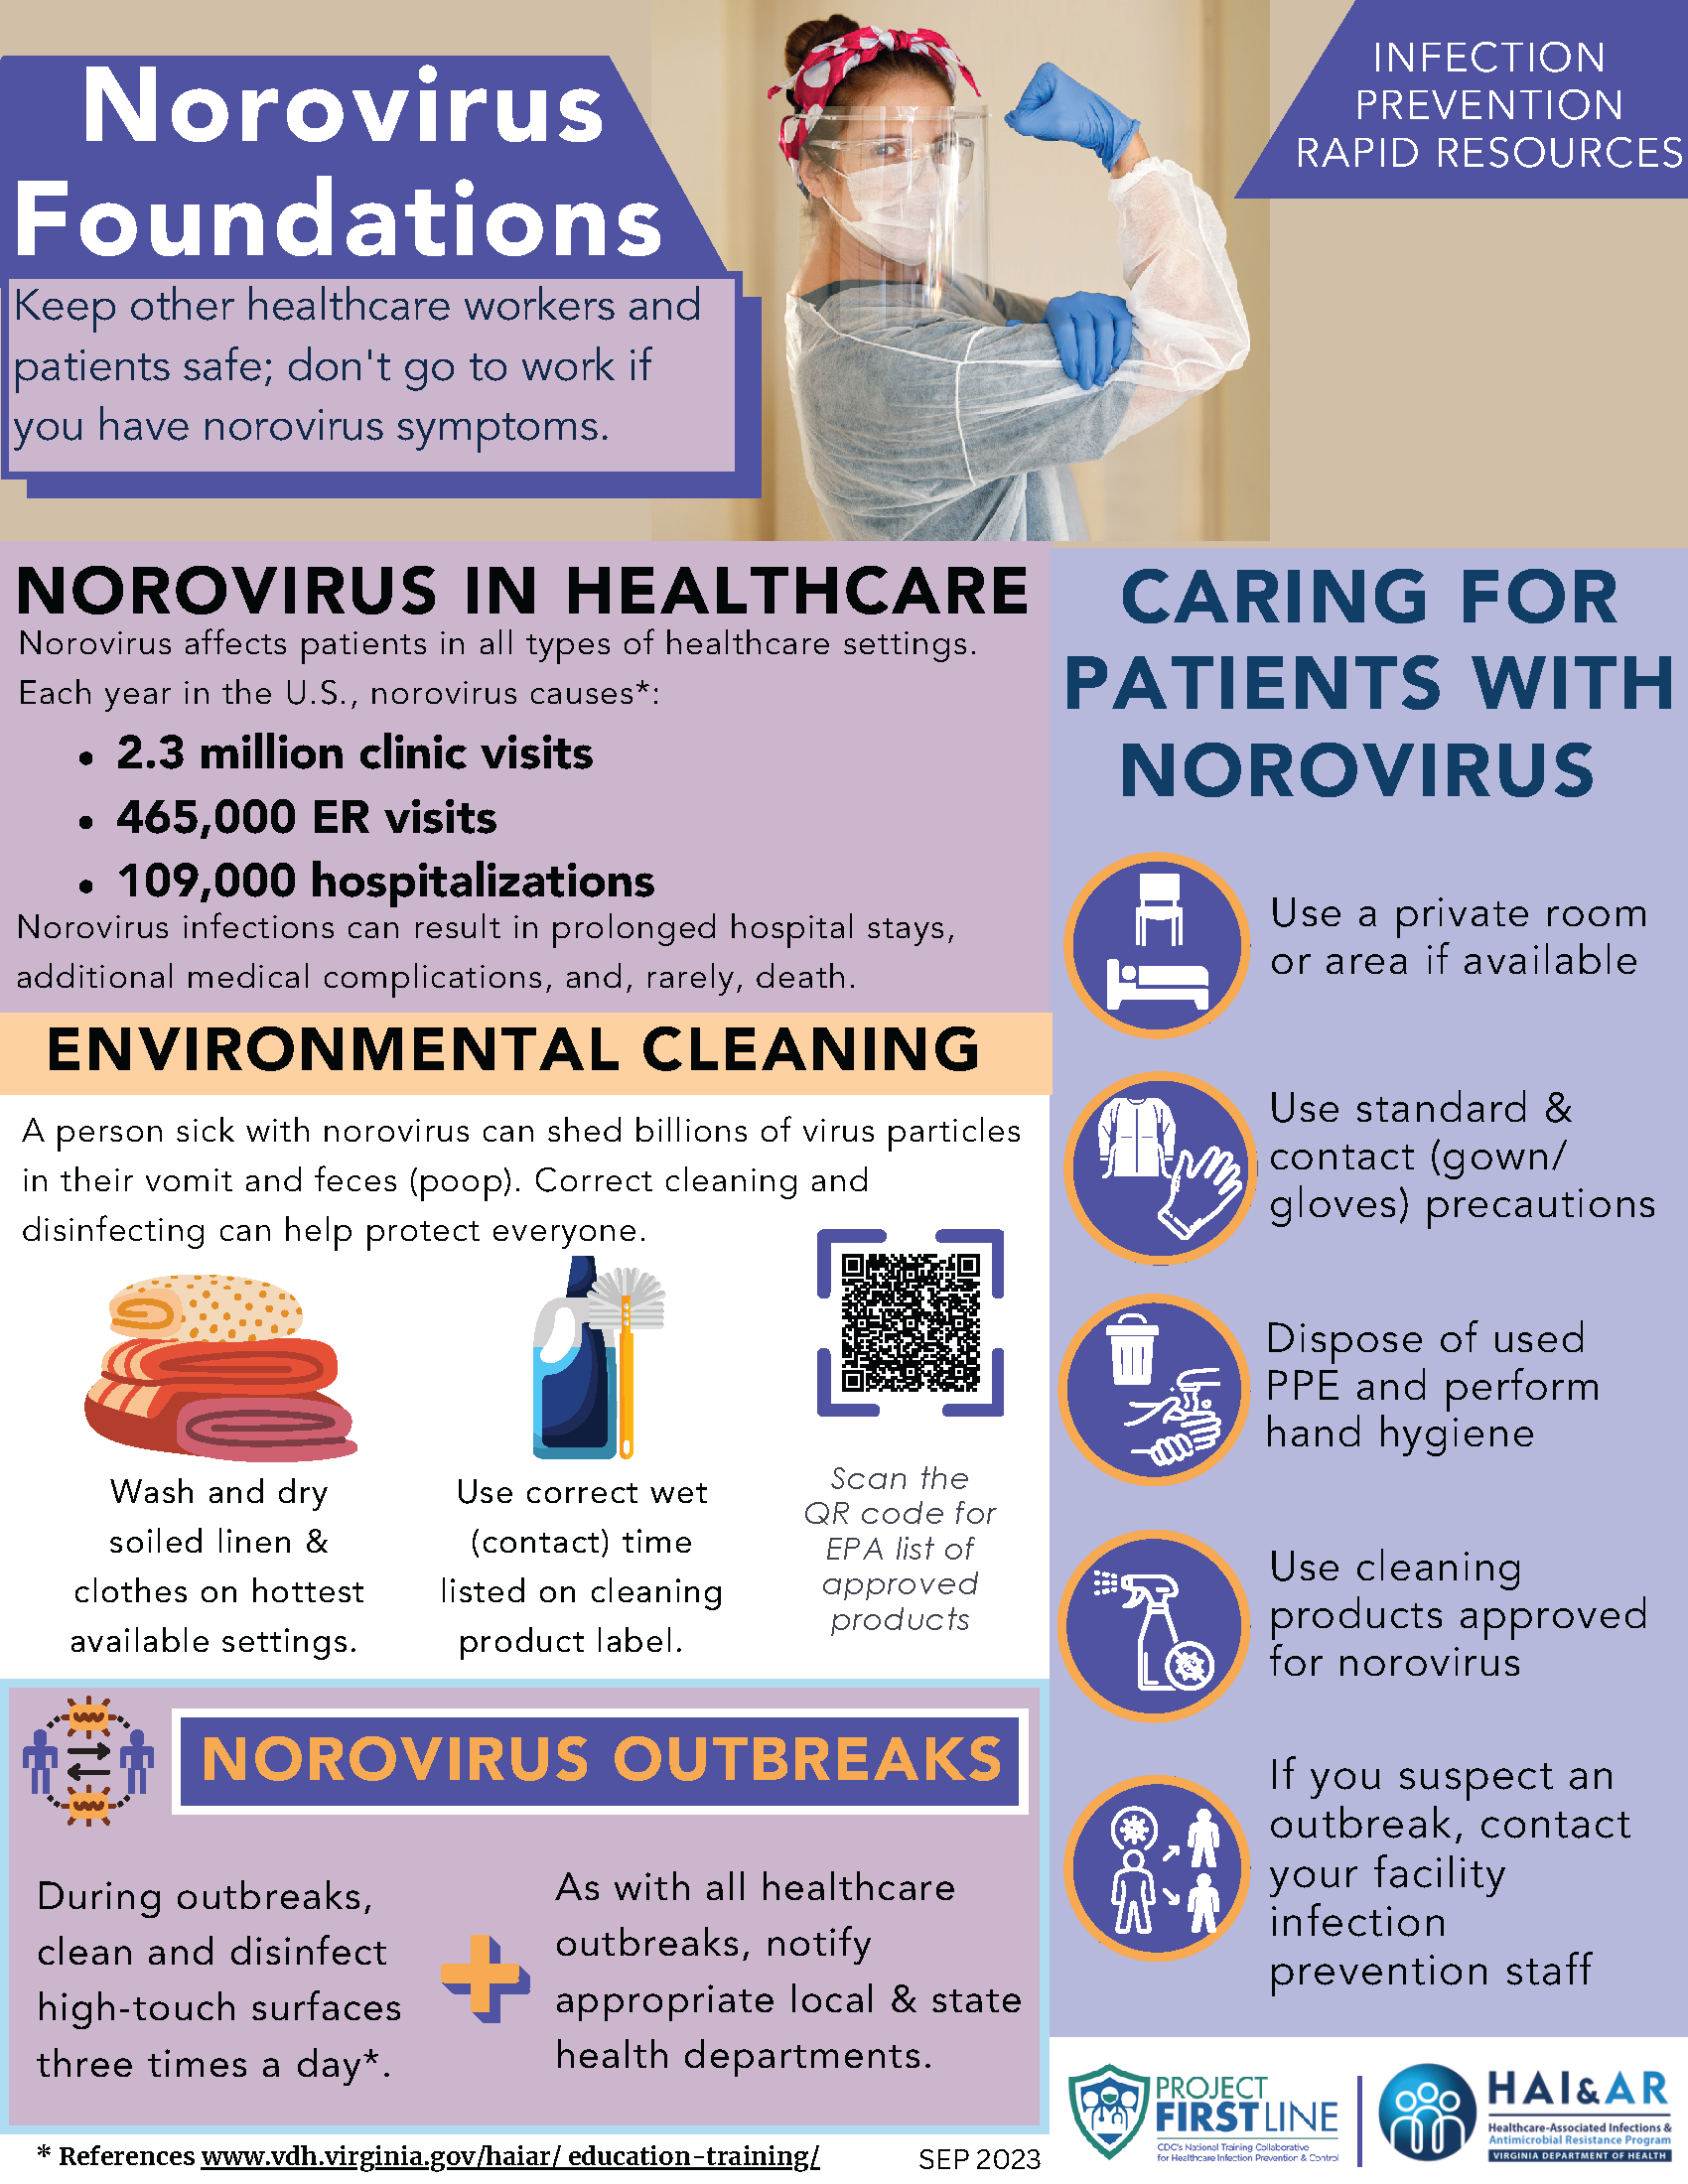 Mini-image of the Norovirus Foundations informational flyer.